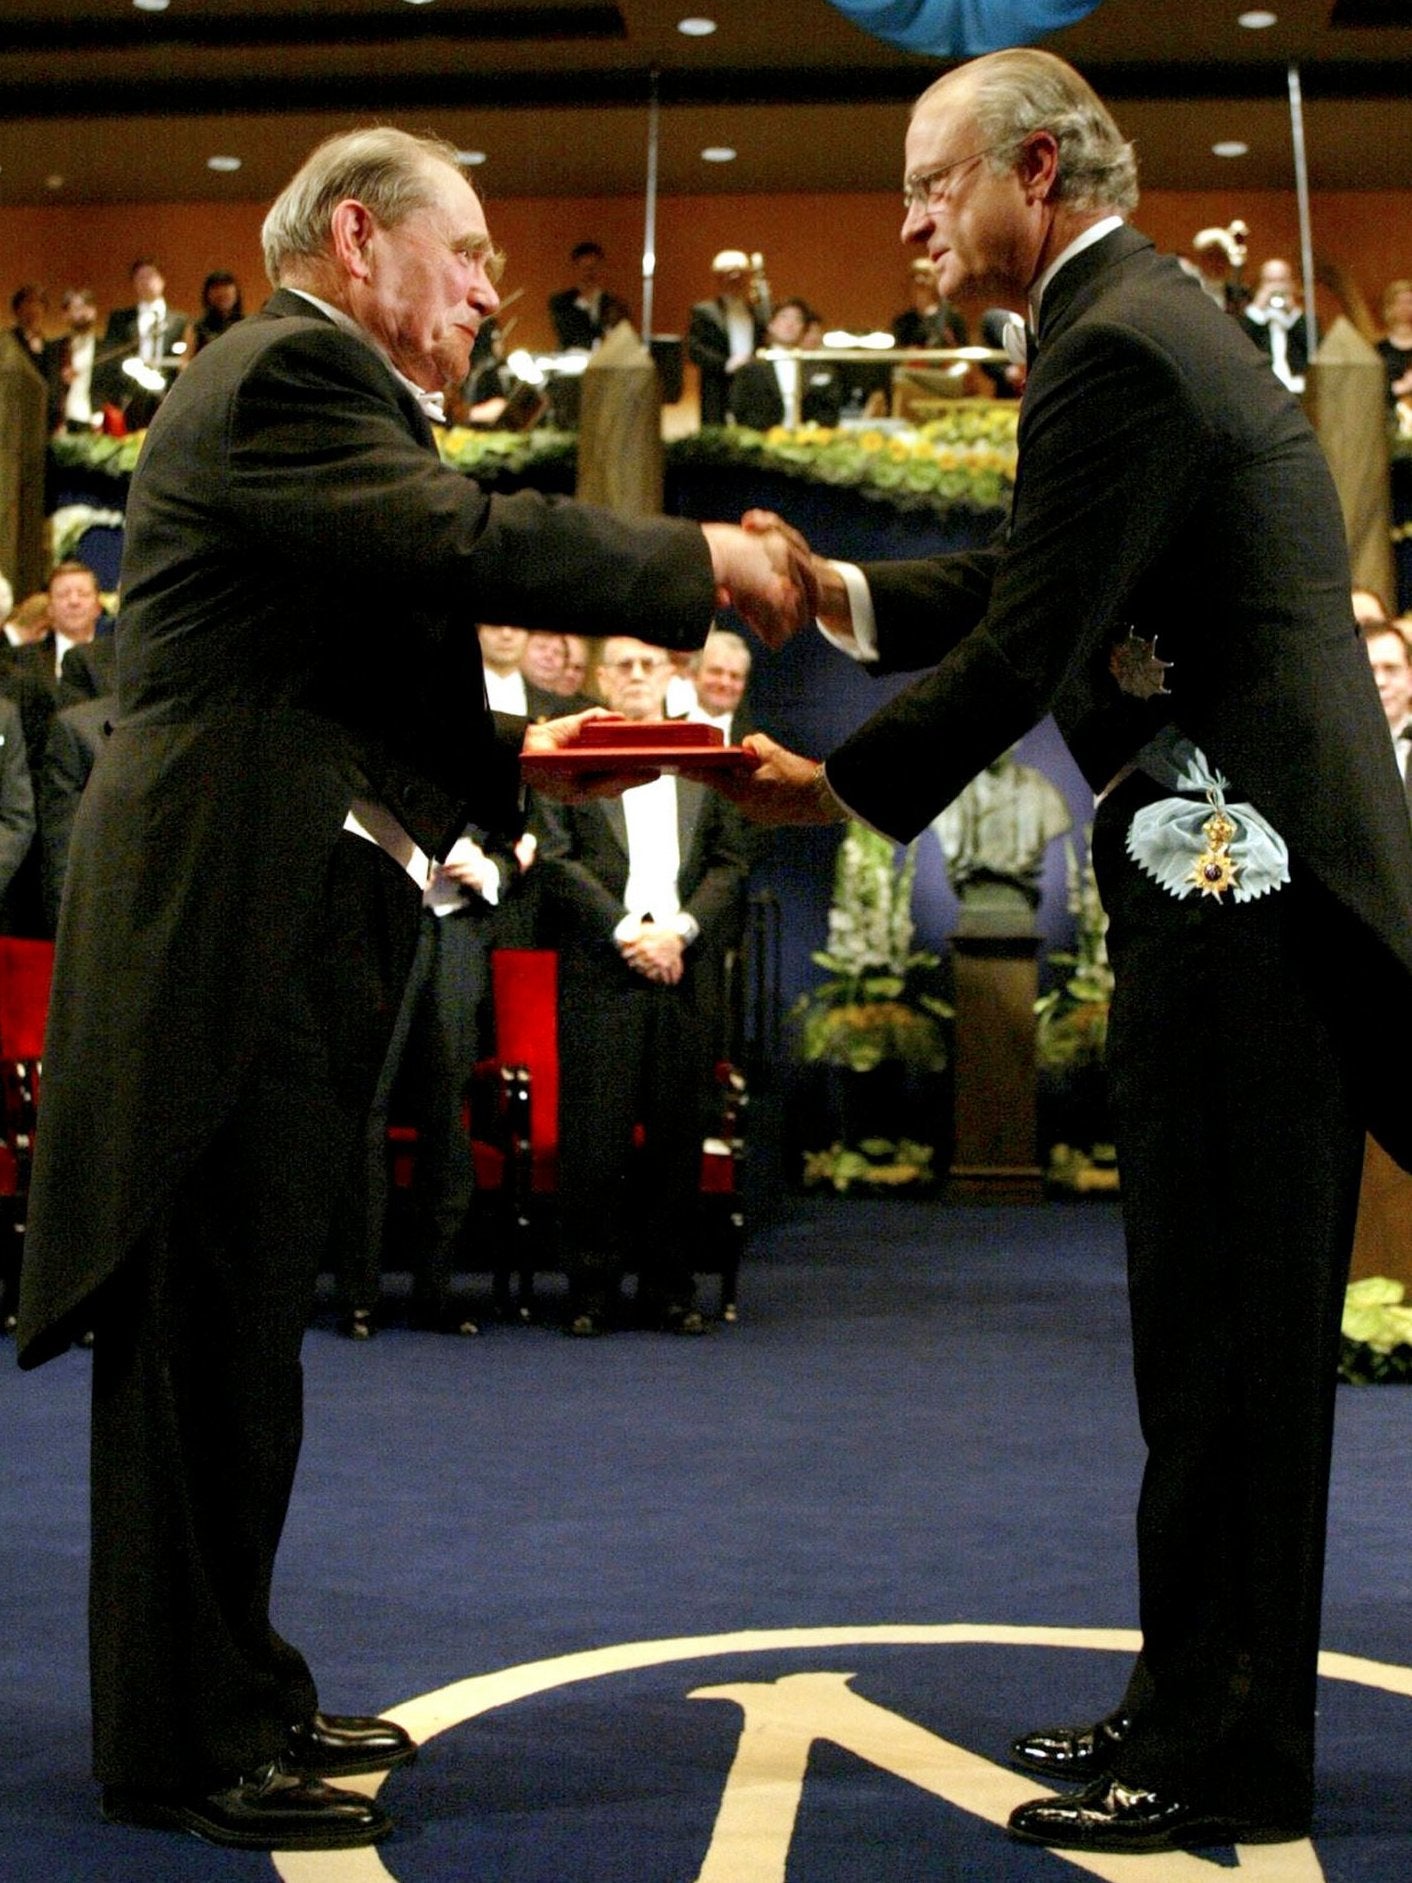 Receiving the 2002 Nobel prize from King Carl Gustaf of Sweden